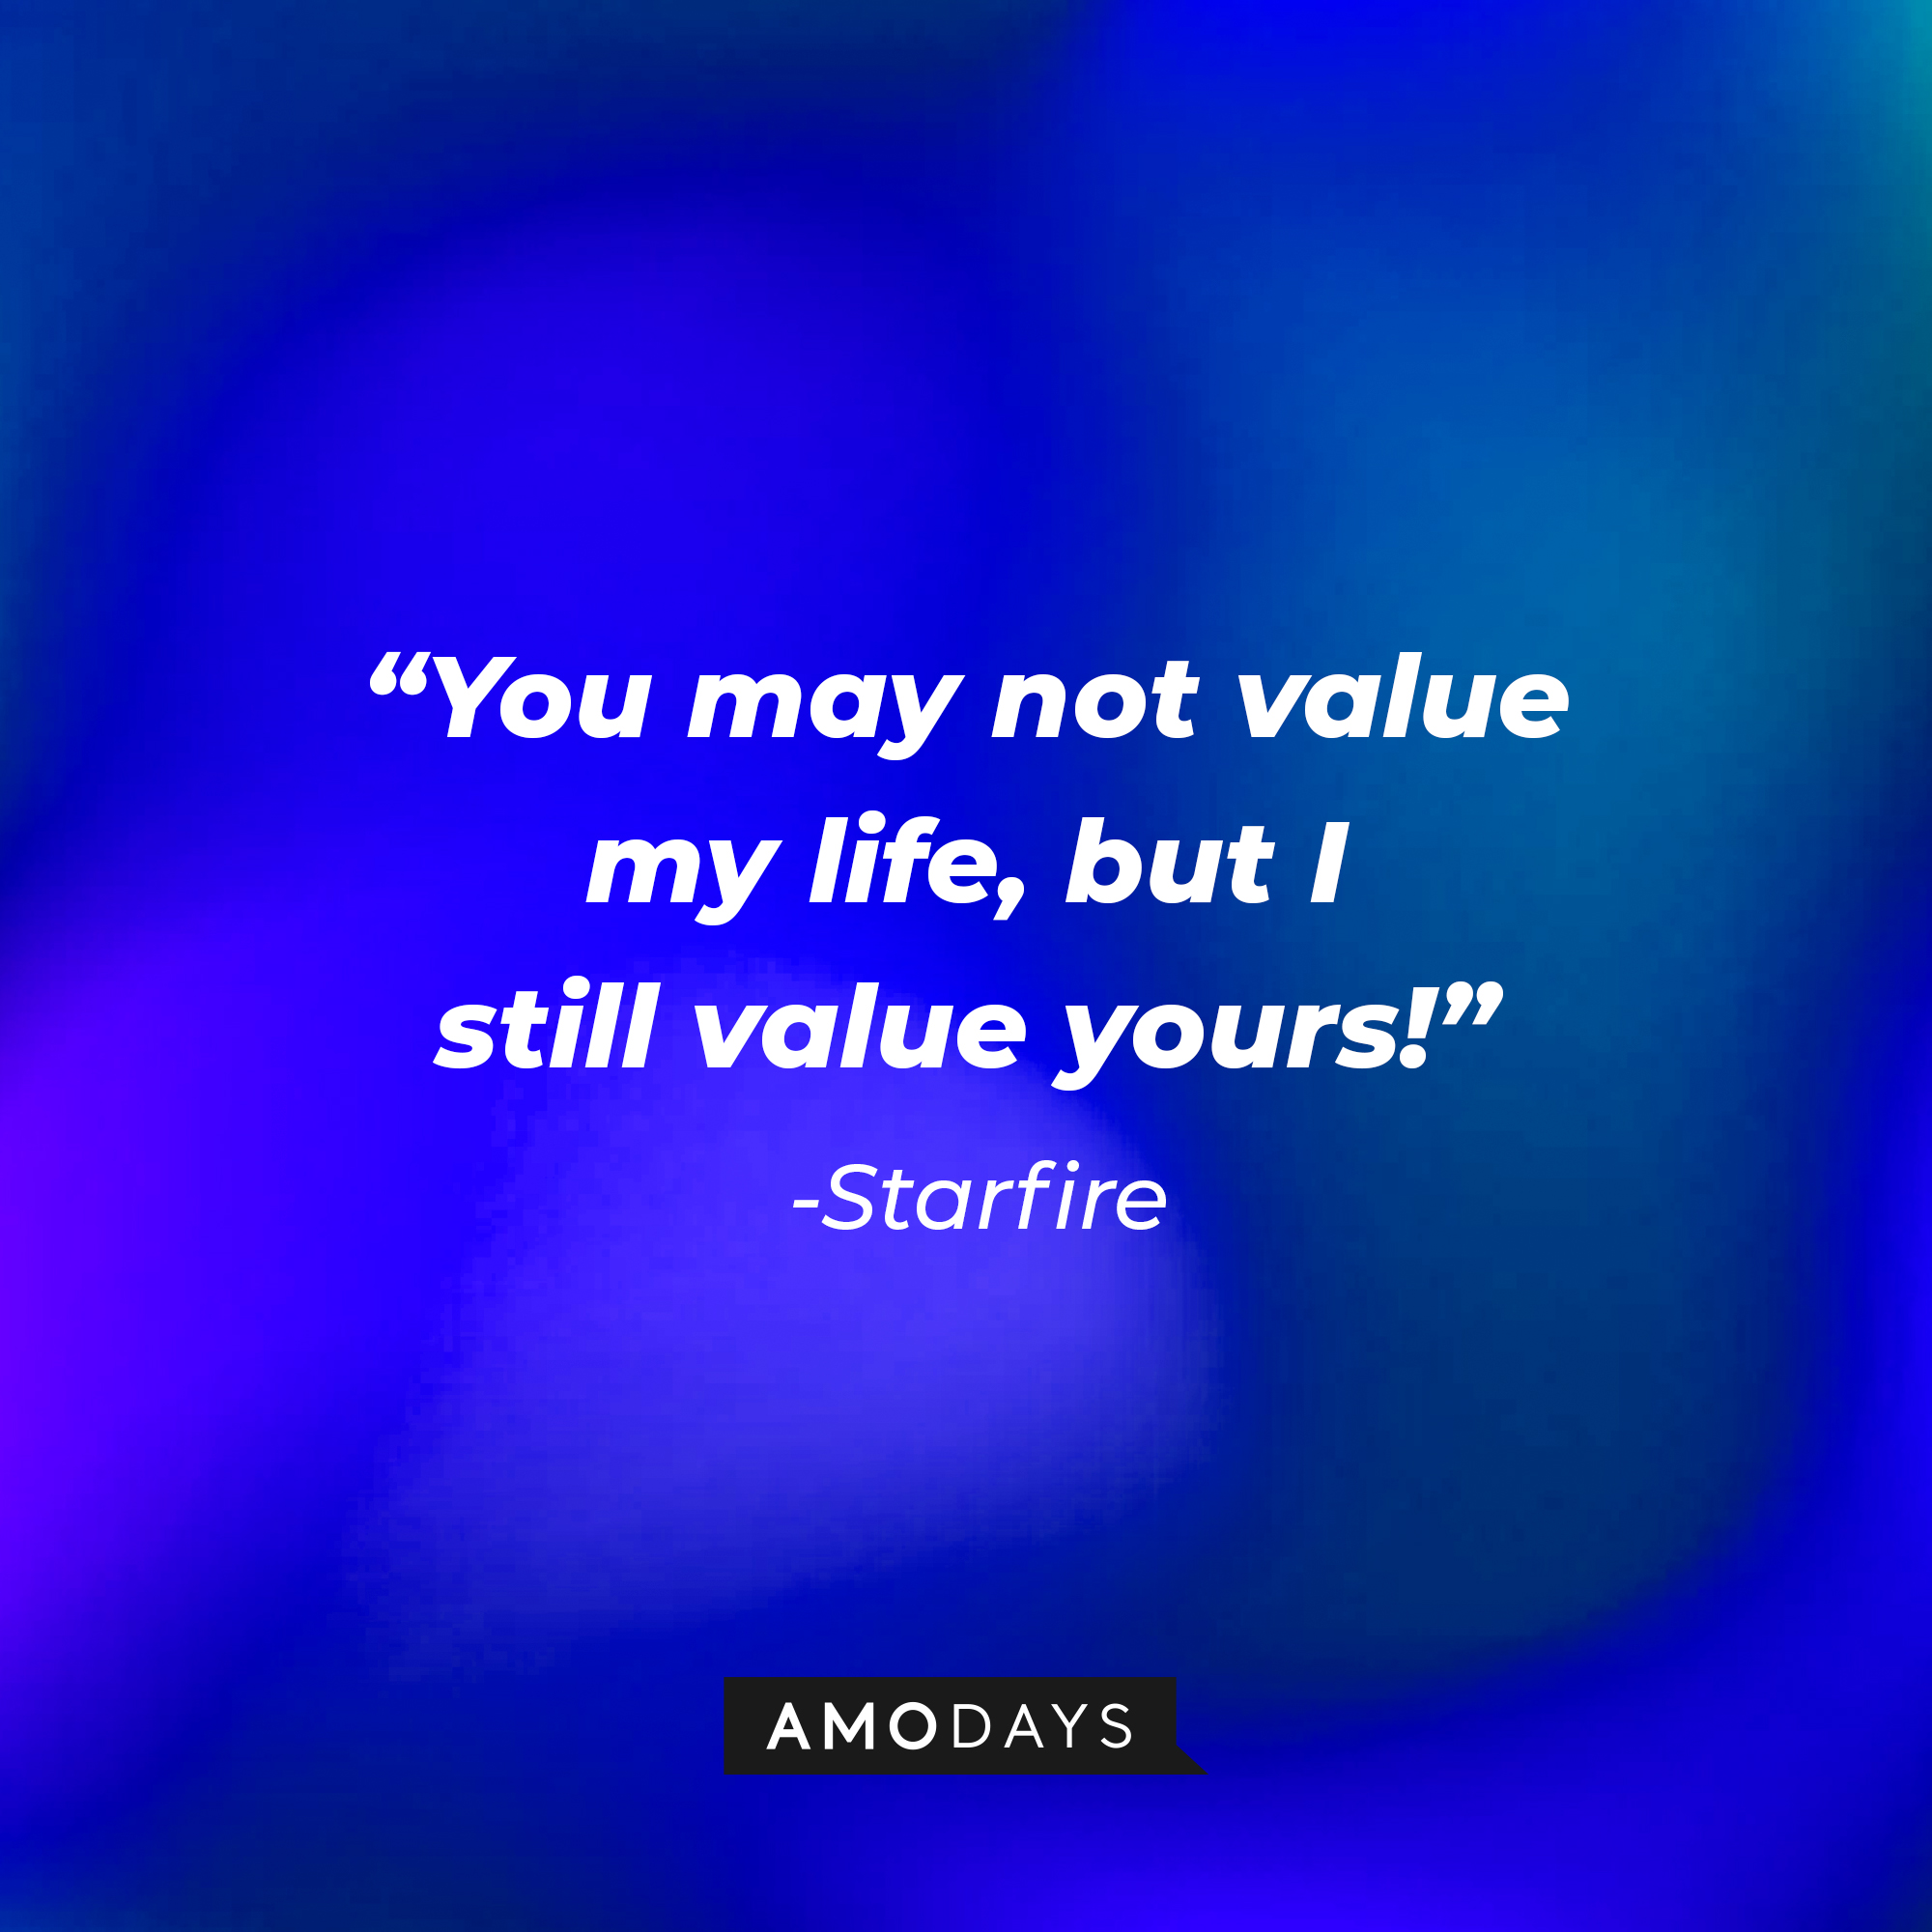 Starfire’s quote: "You may not value my life, but I still value yours!" | Source: AmoDays